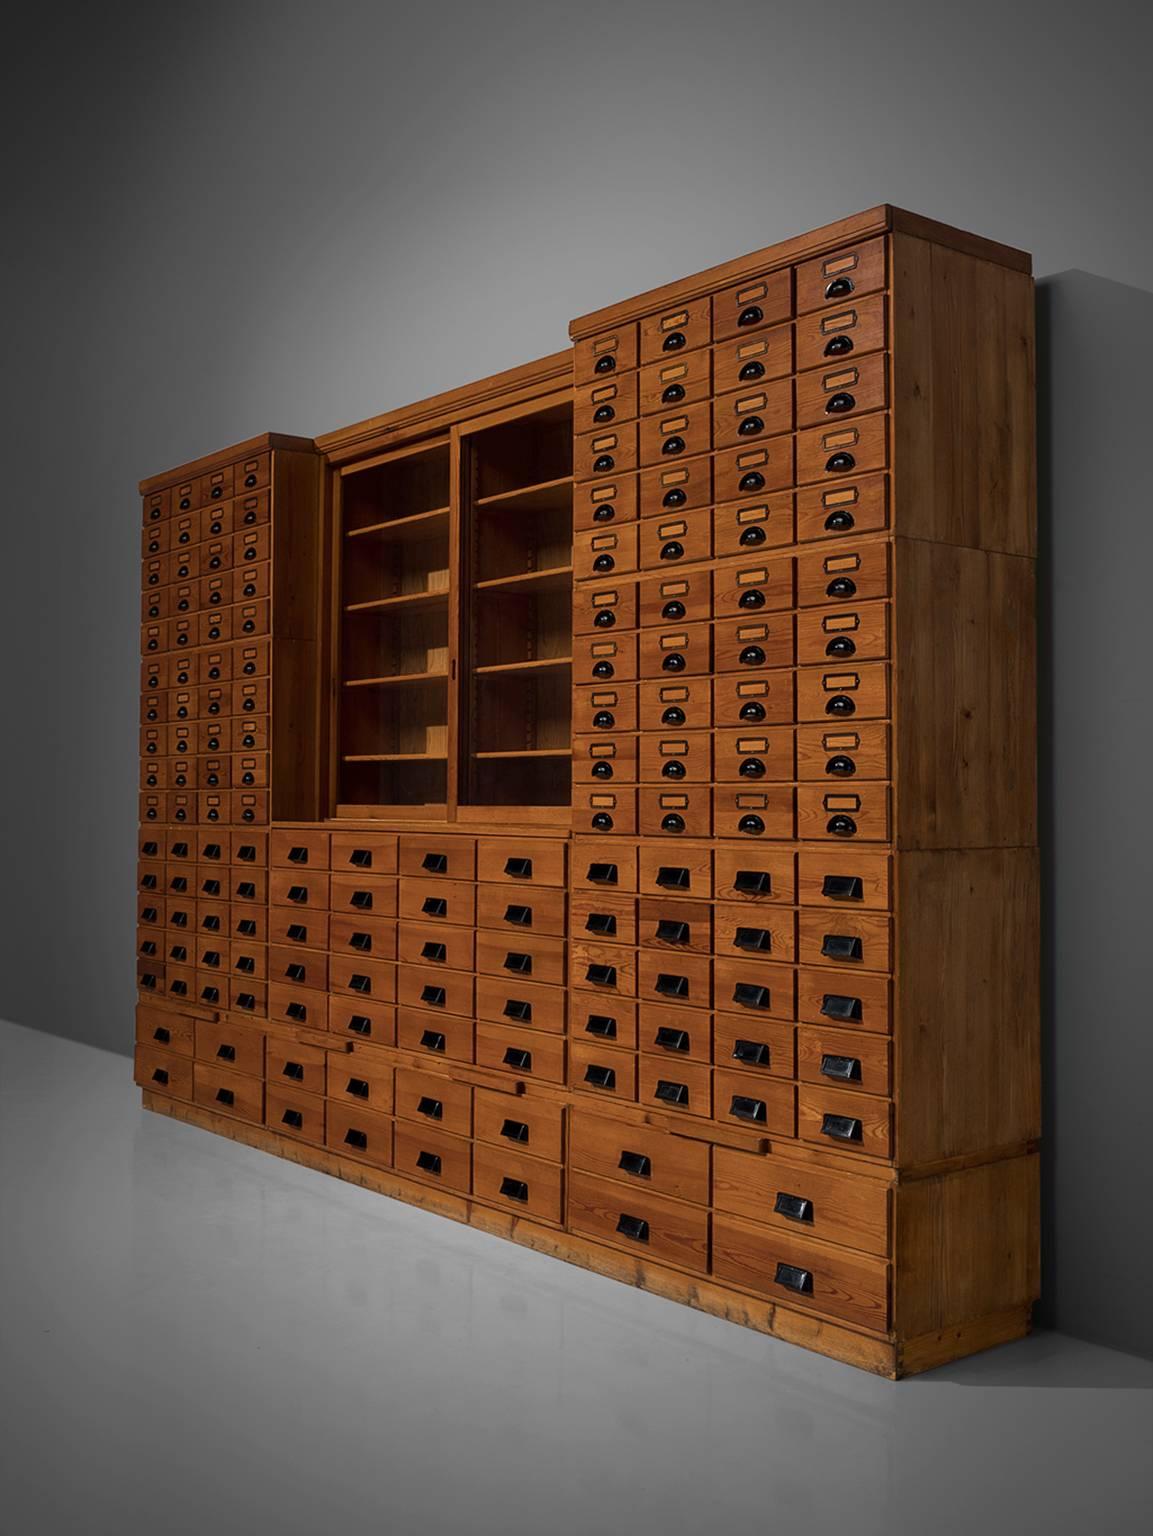 Cabinet, in wood, glass and metal, Denmark, 1950s.

Extreme large apothecary chest which counts a total of 156 drawers! This beautiful piece is made from redwood and is build up in eleven elements each divided with drawers in different sizes. One